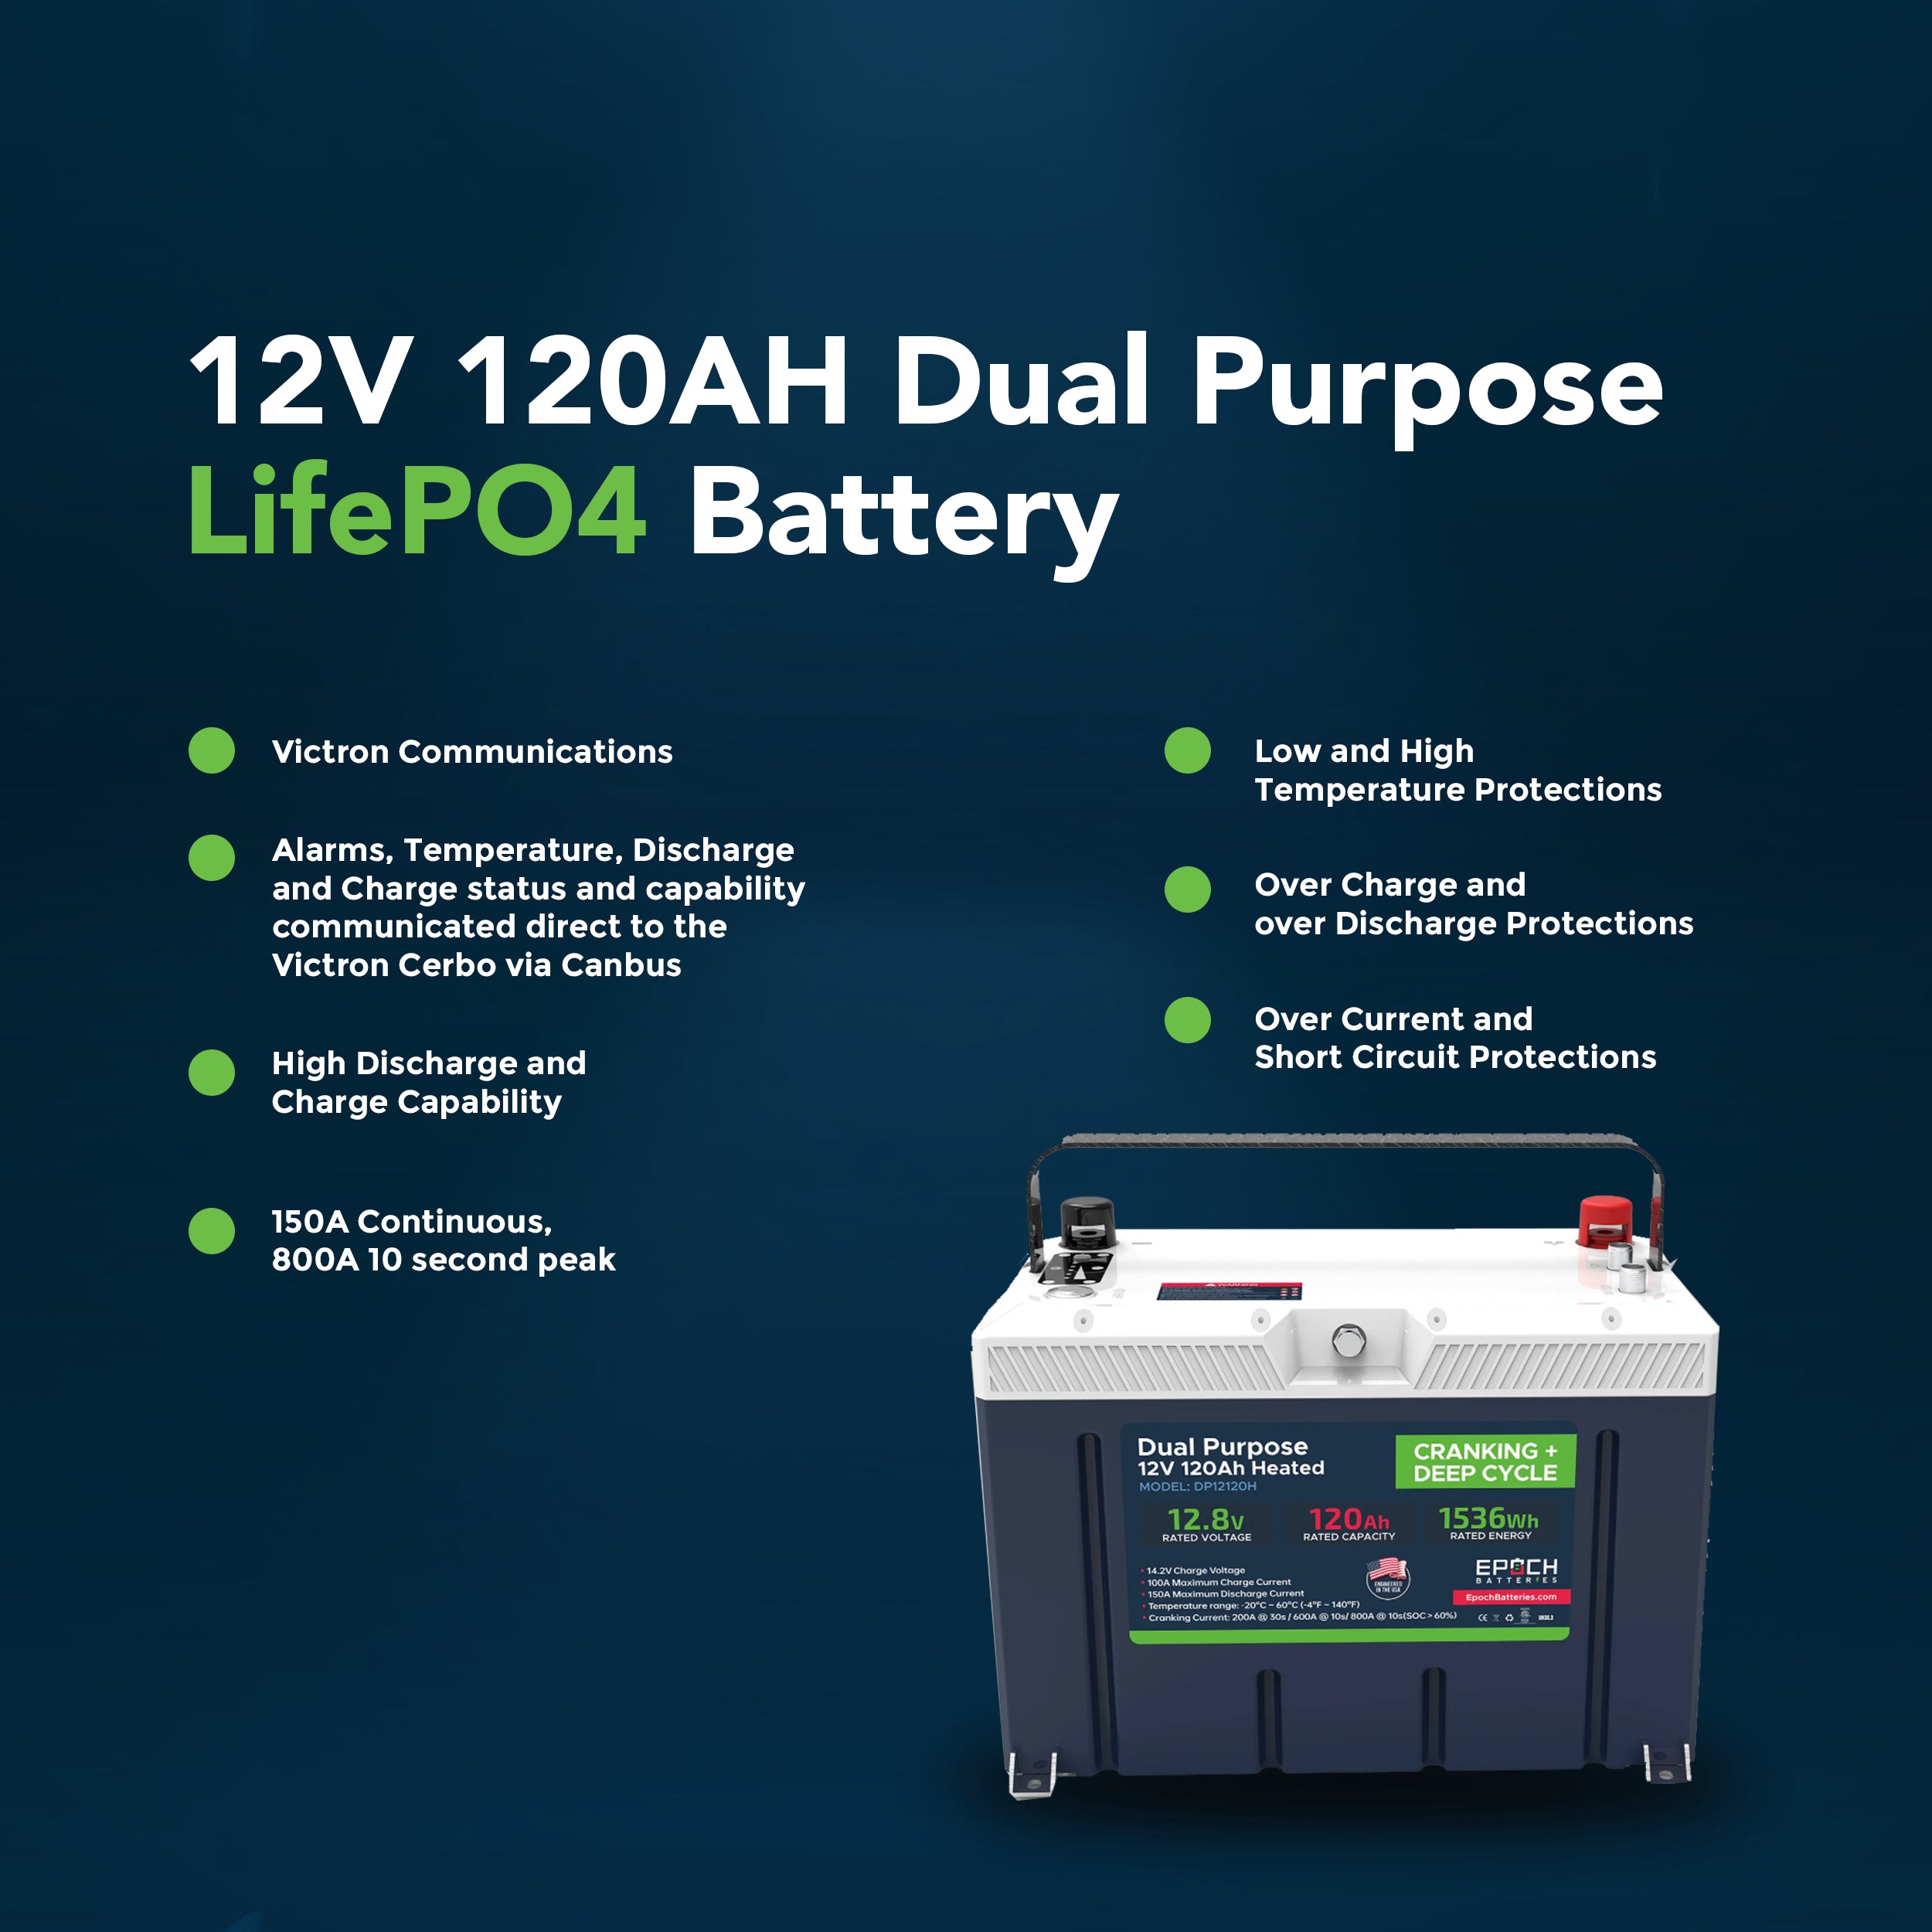 Premium LiFePO4 Batteries for All Applications